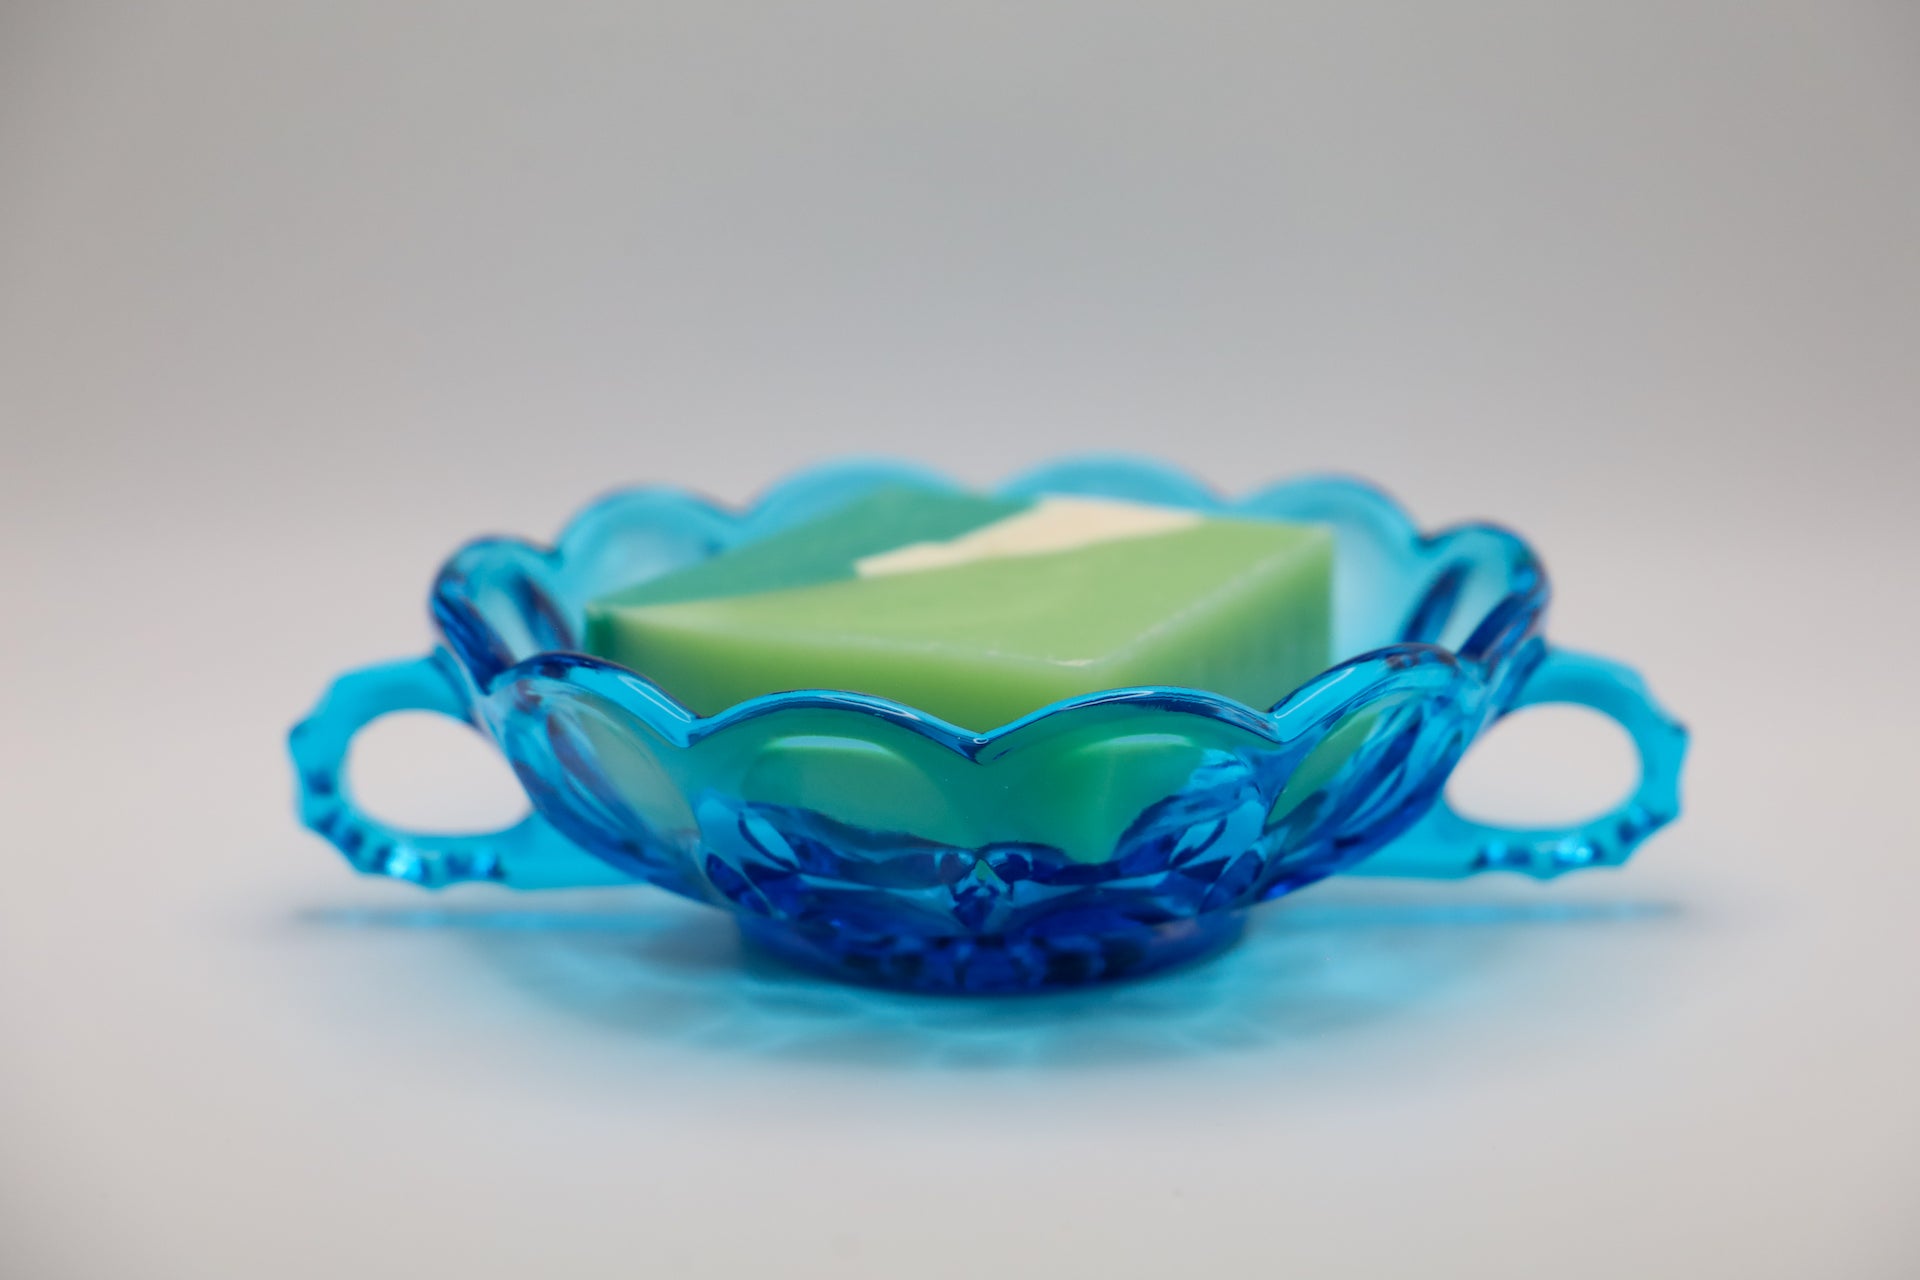 Fairfield Blue Nappy Dish by Anchor Hocking